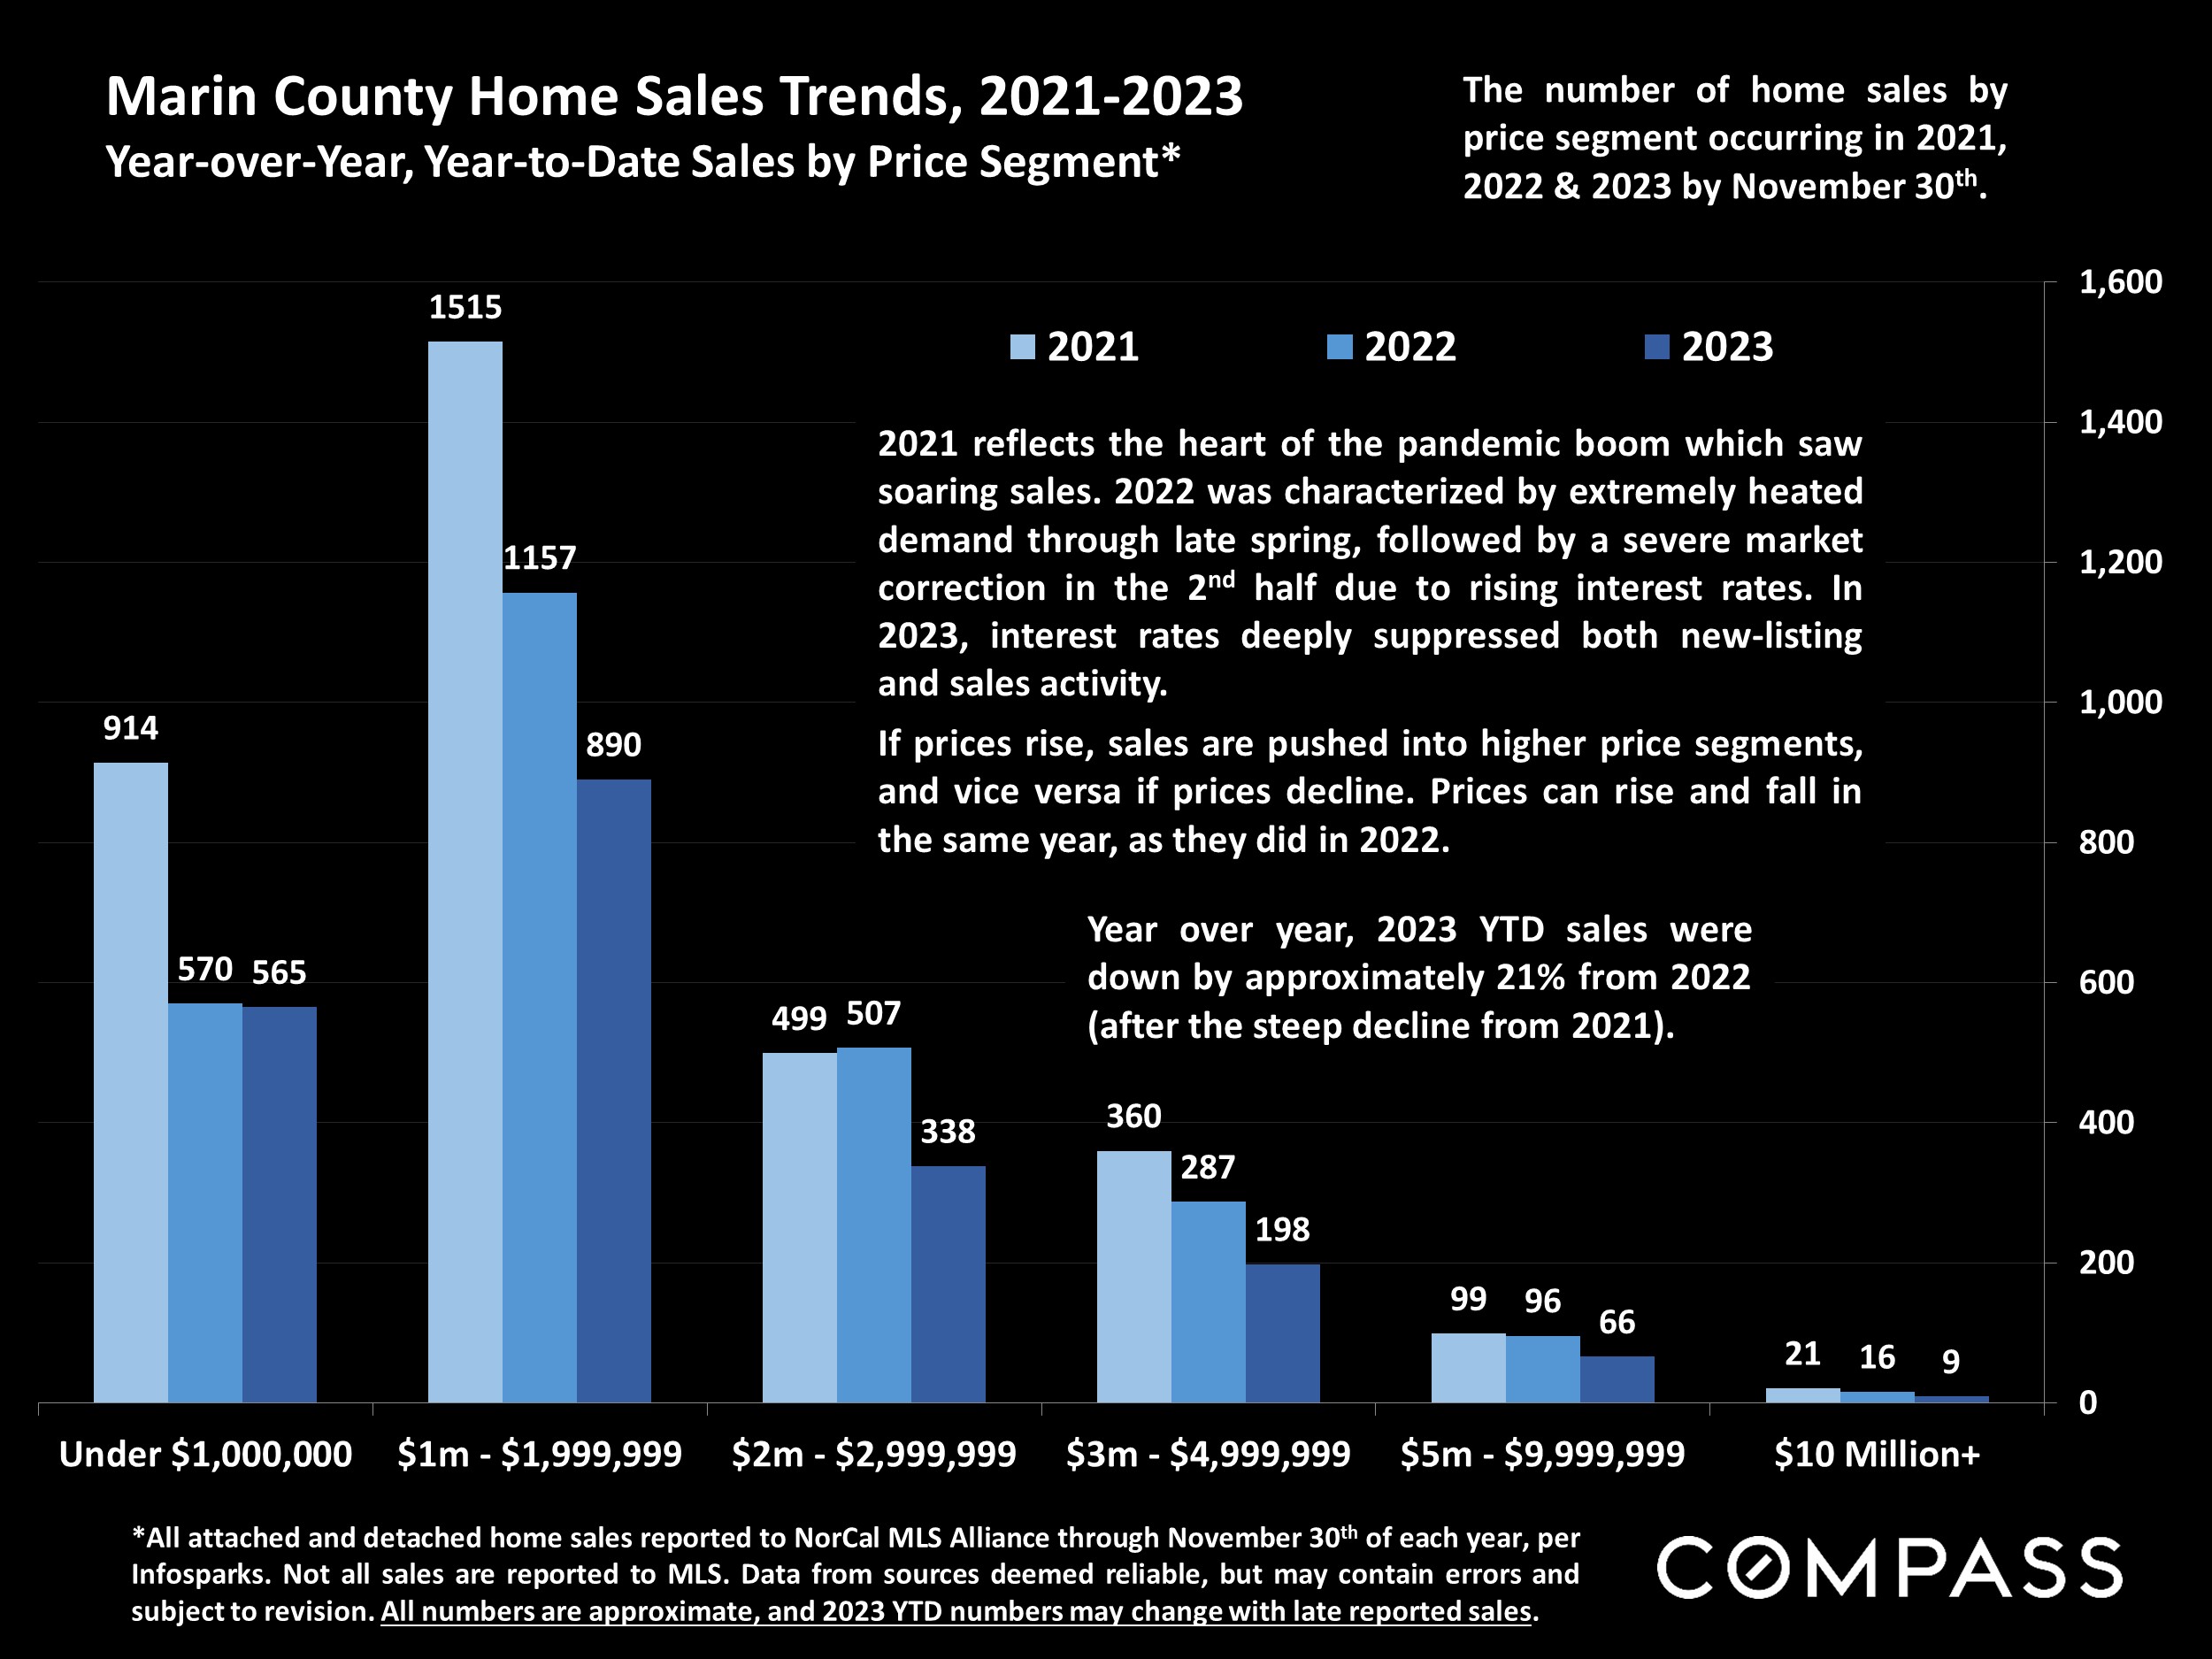 Marin County Home Sales Trends, 2021-2023 Year-over-Year, Year-to-Date Sales by Price Segment*